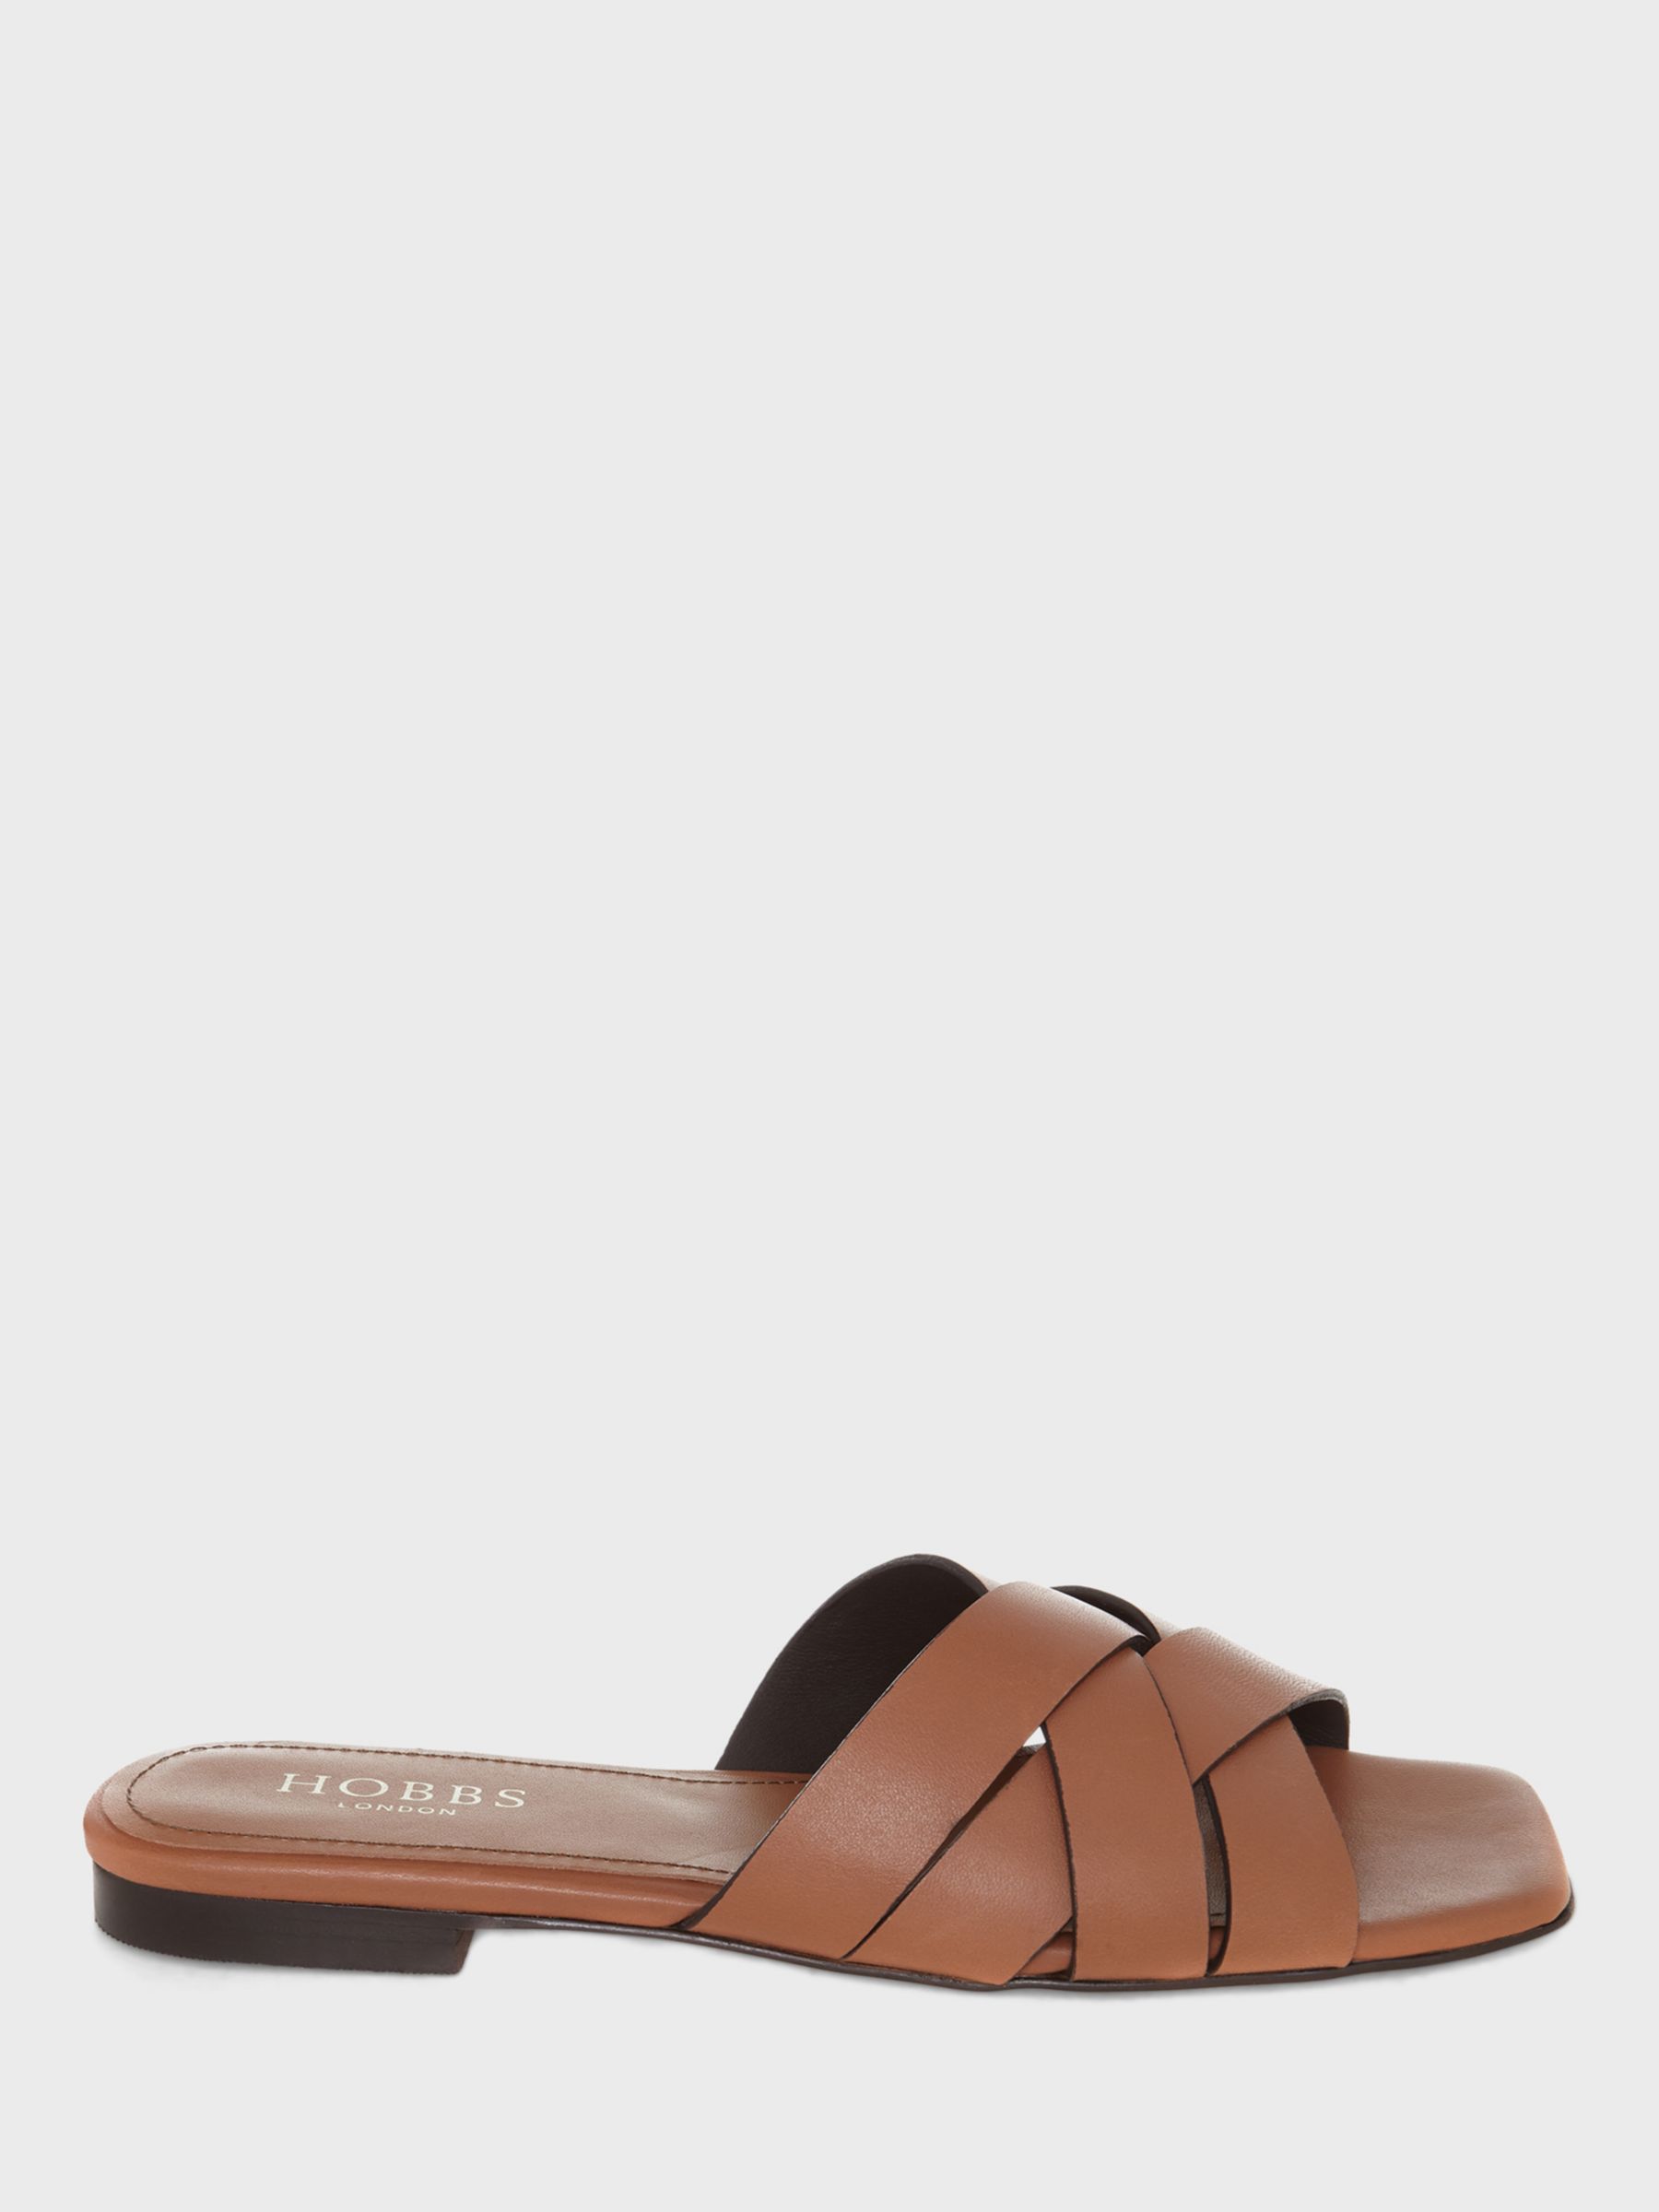 Hobbs Annie Woven Leather Slider Sandals, Tan at John Lewis & Partners